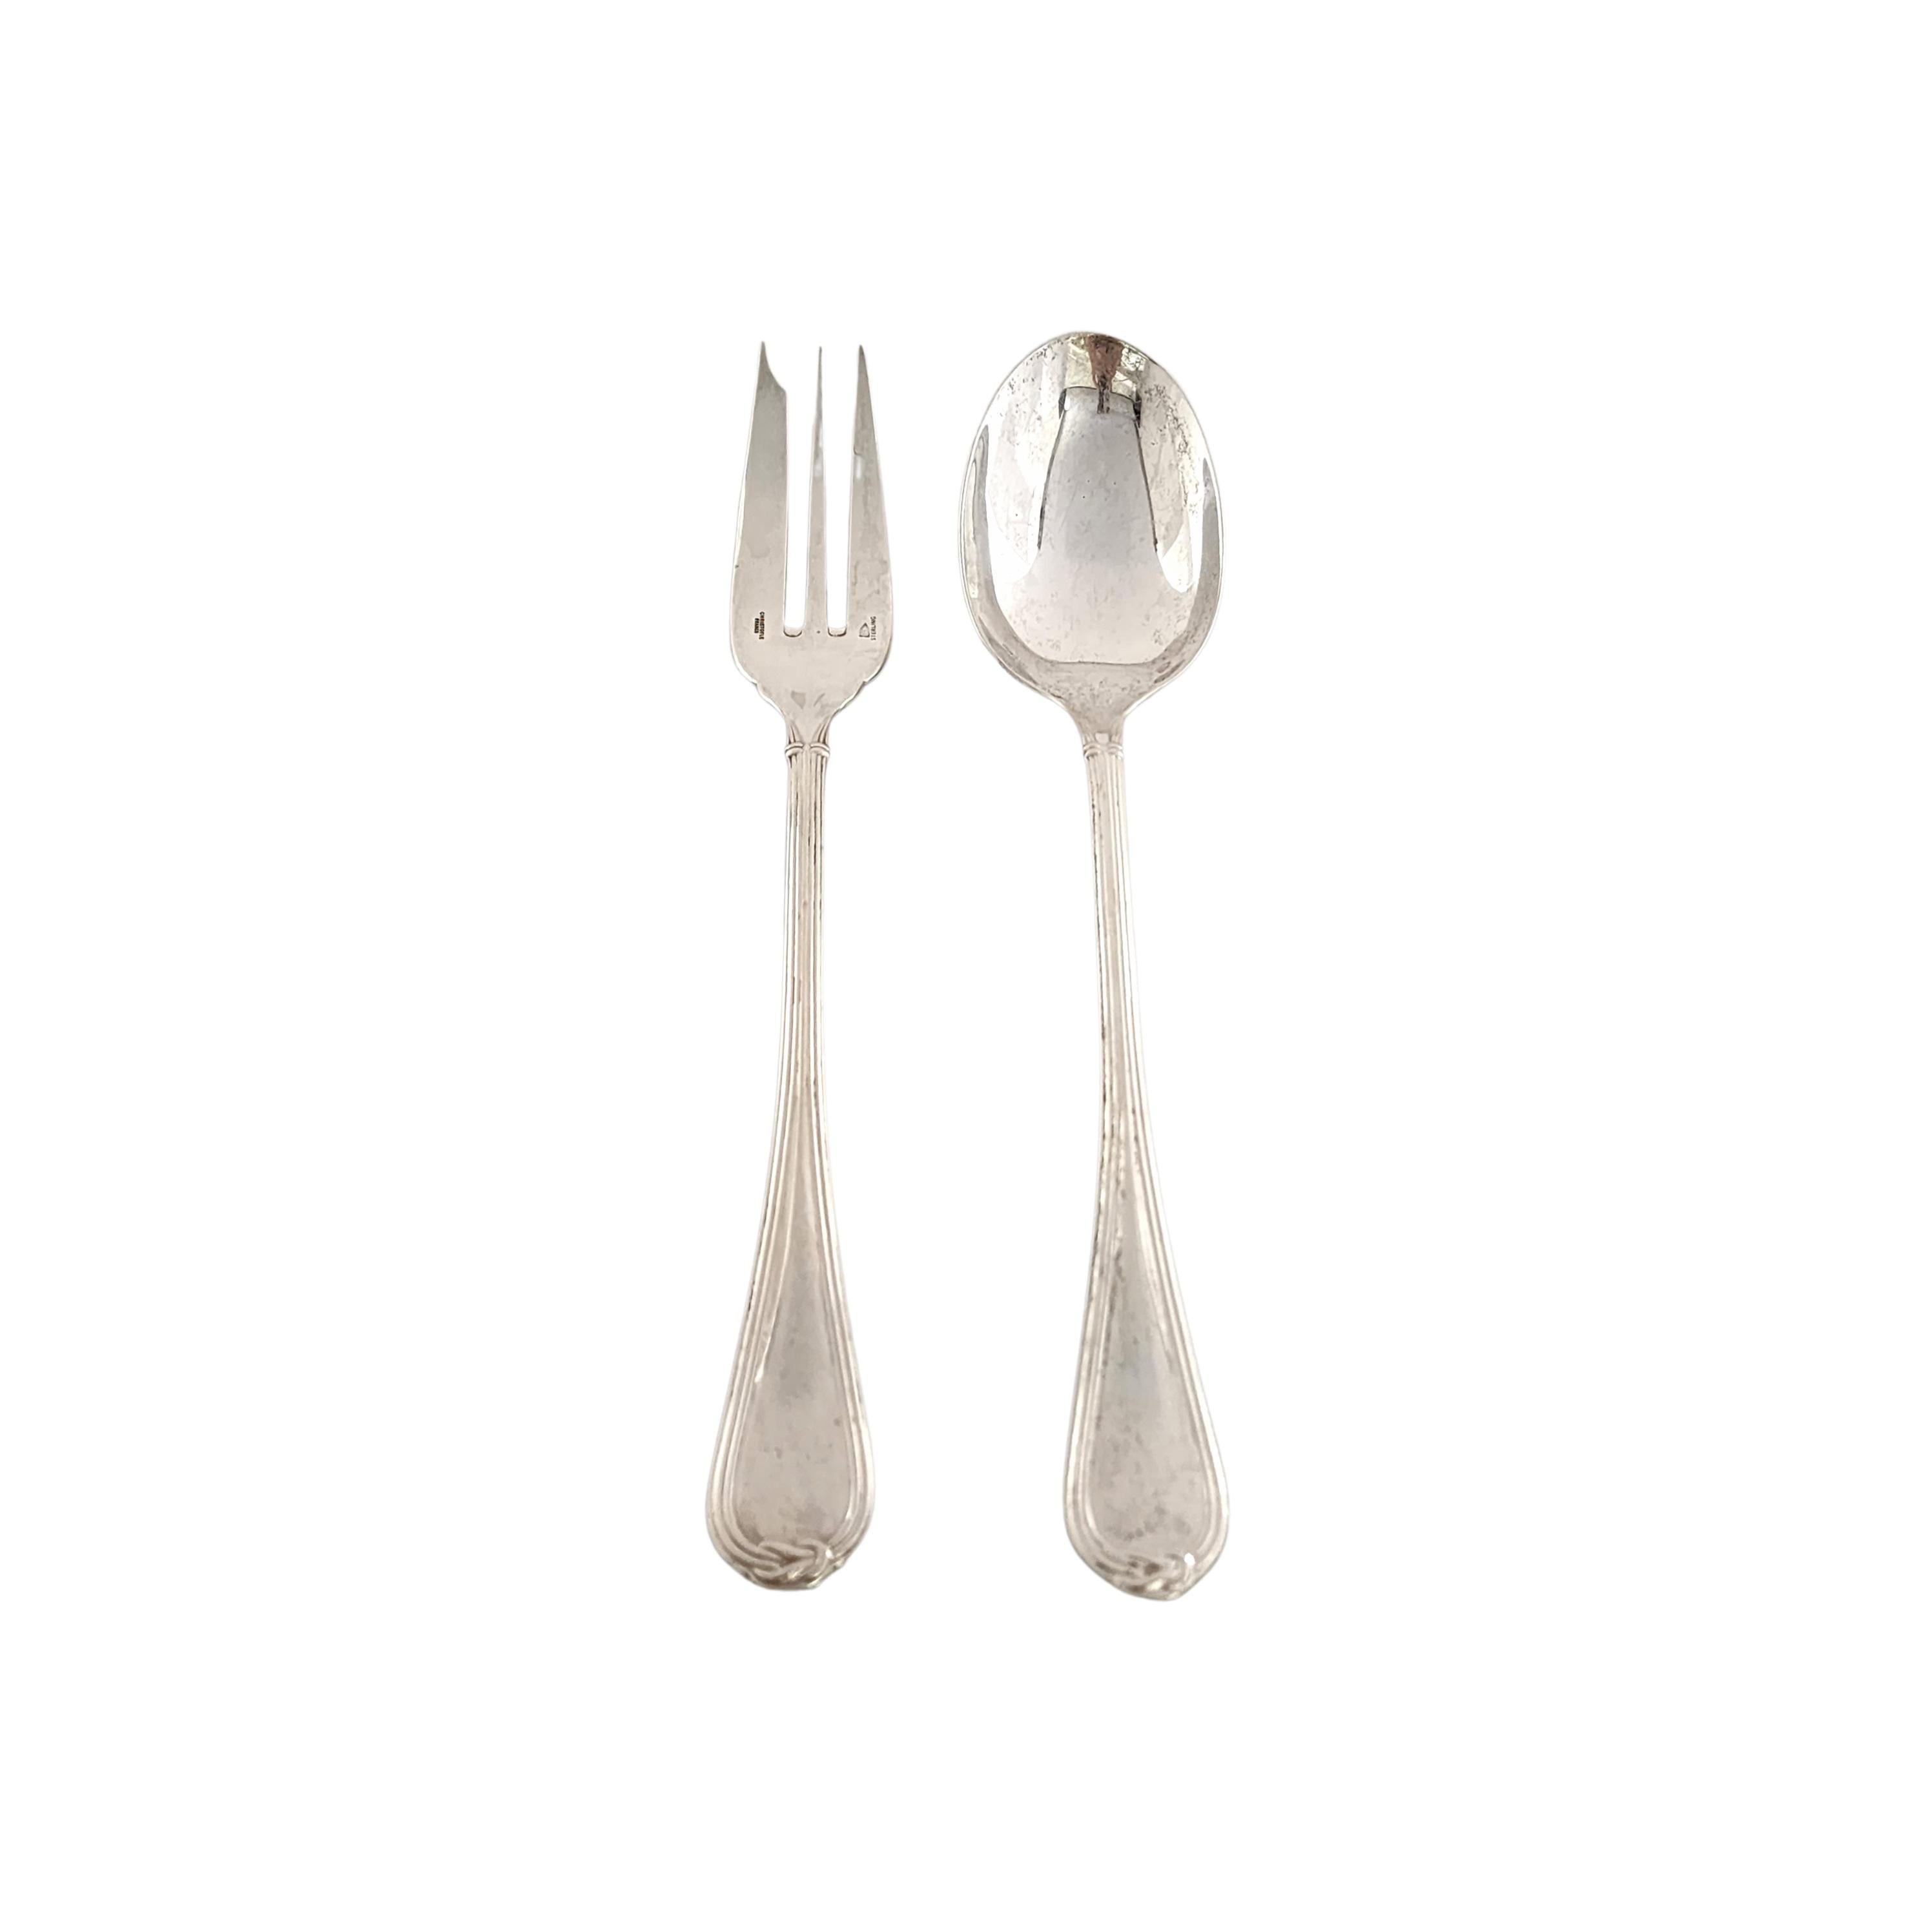 Sterling silver salad serving fork and spoon set in the Oceana pattern by Christofle.

A beautiful large serving set in a simple and elegant pattern, including a spoon and fork.

Spoon measures approx 10